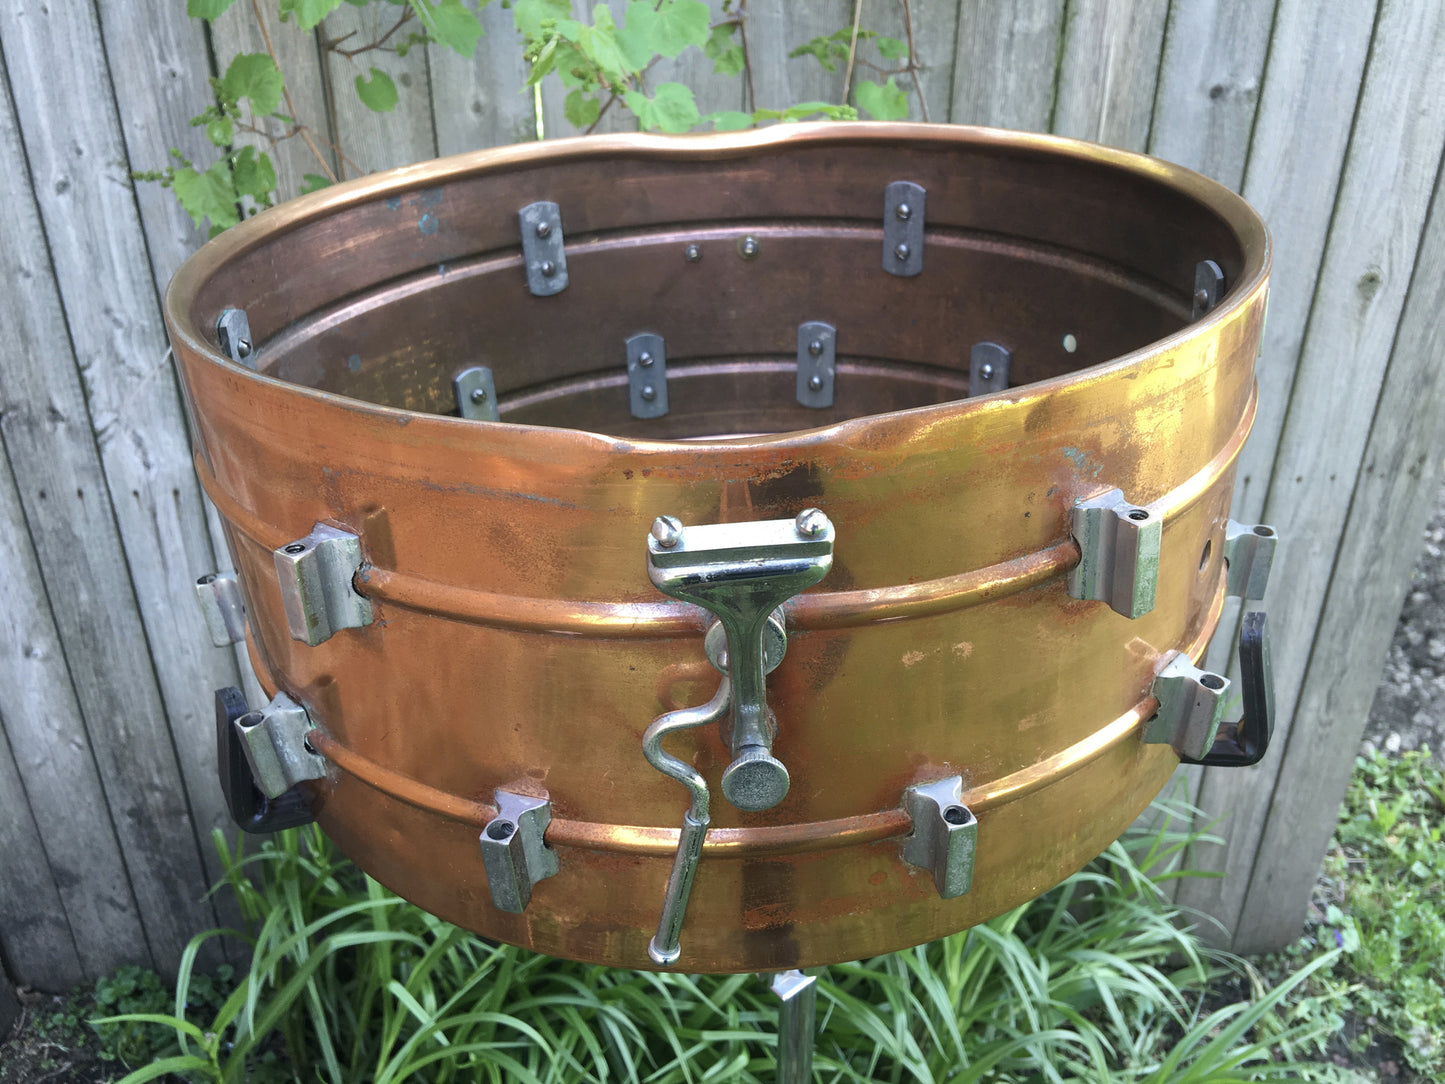 Extremely Rare 1930's Frank Wolf 7"x14" 2-to-1 Copper Shell Snare Drum